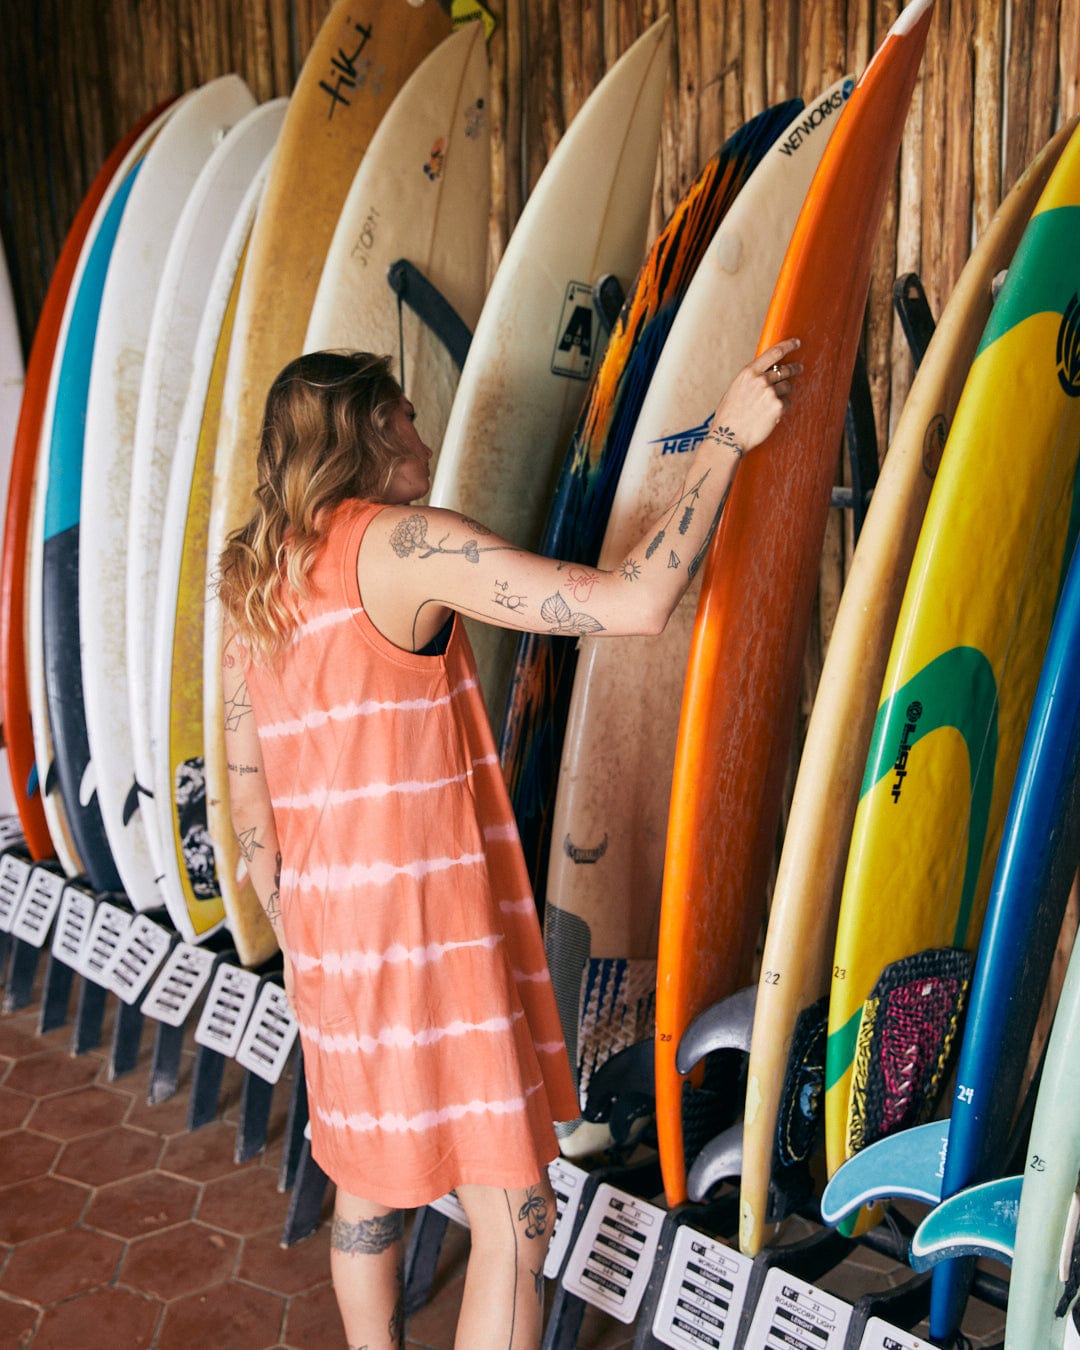 A person in a Saltrock Eliana - Womens Tie Dye Vest Dress - Peach is browsing through a rack of surfboards mounted against a wall.